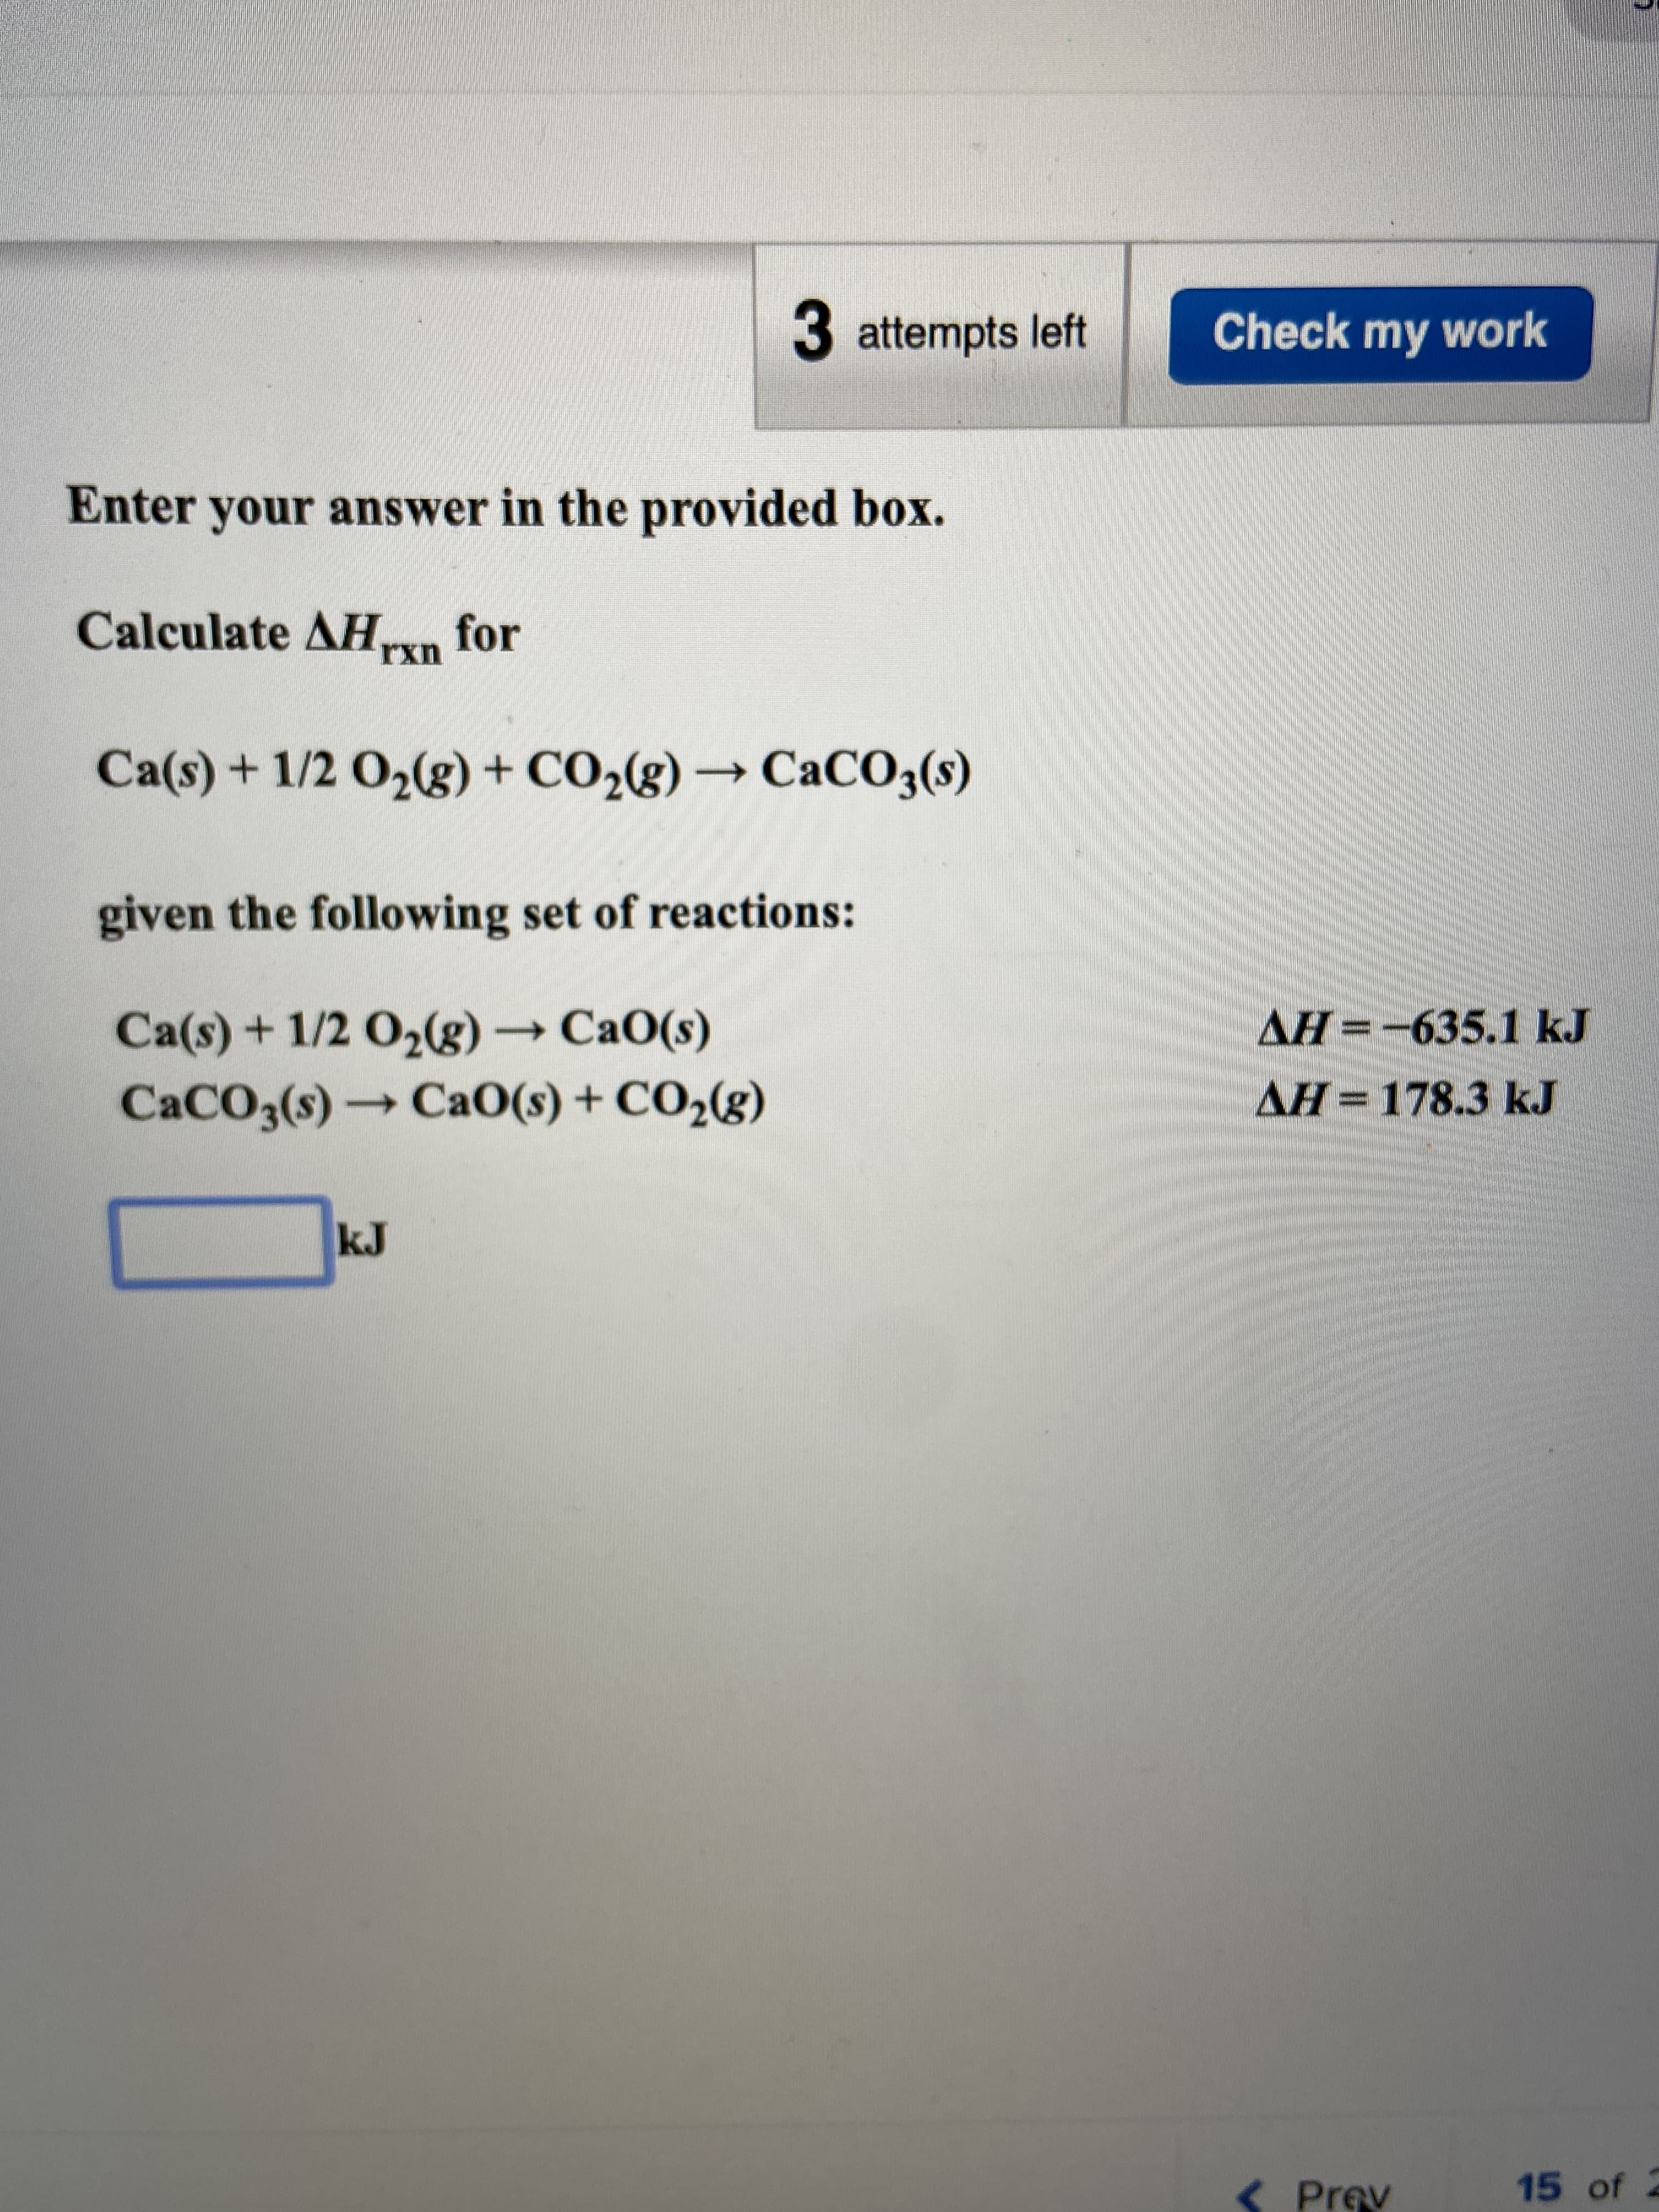 Calculate AH,ryn for
rxn
Ca(s) + 1/2 O2(g) + CO2(g) → CaCO;(s)
